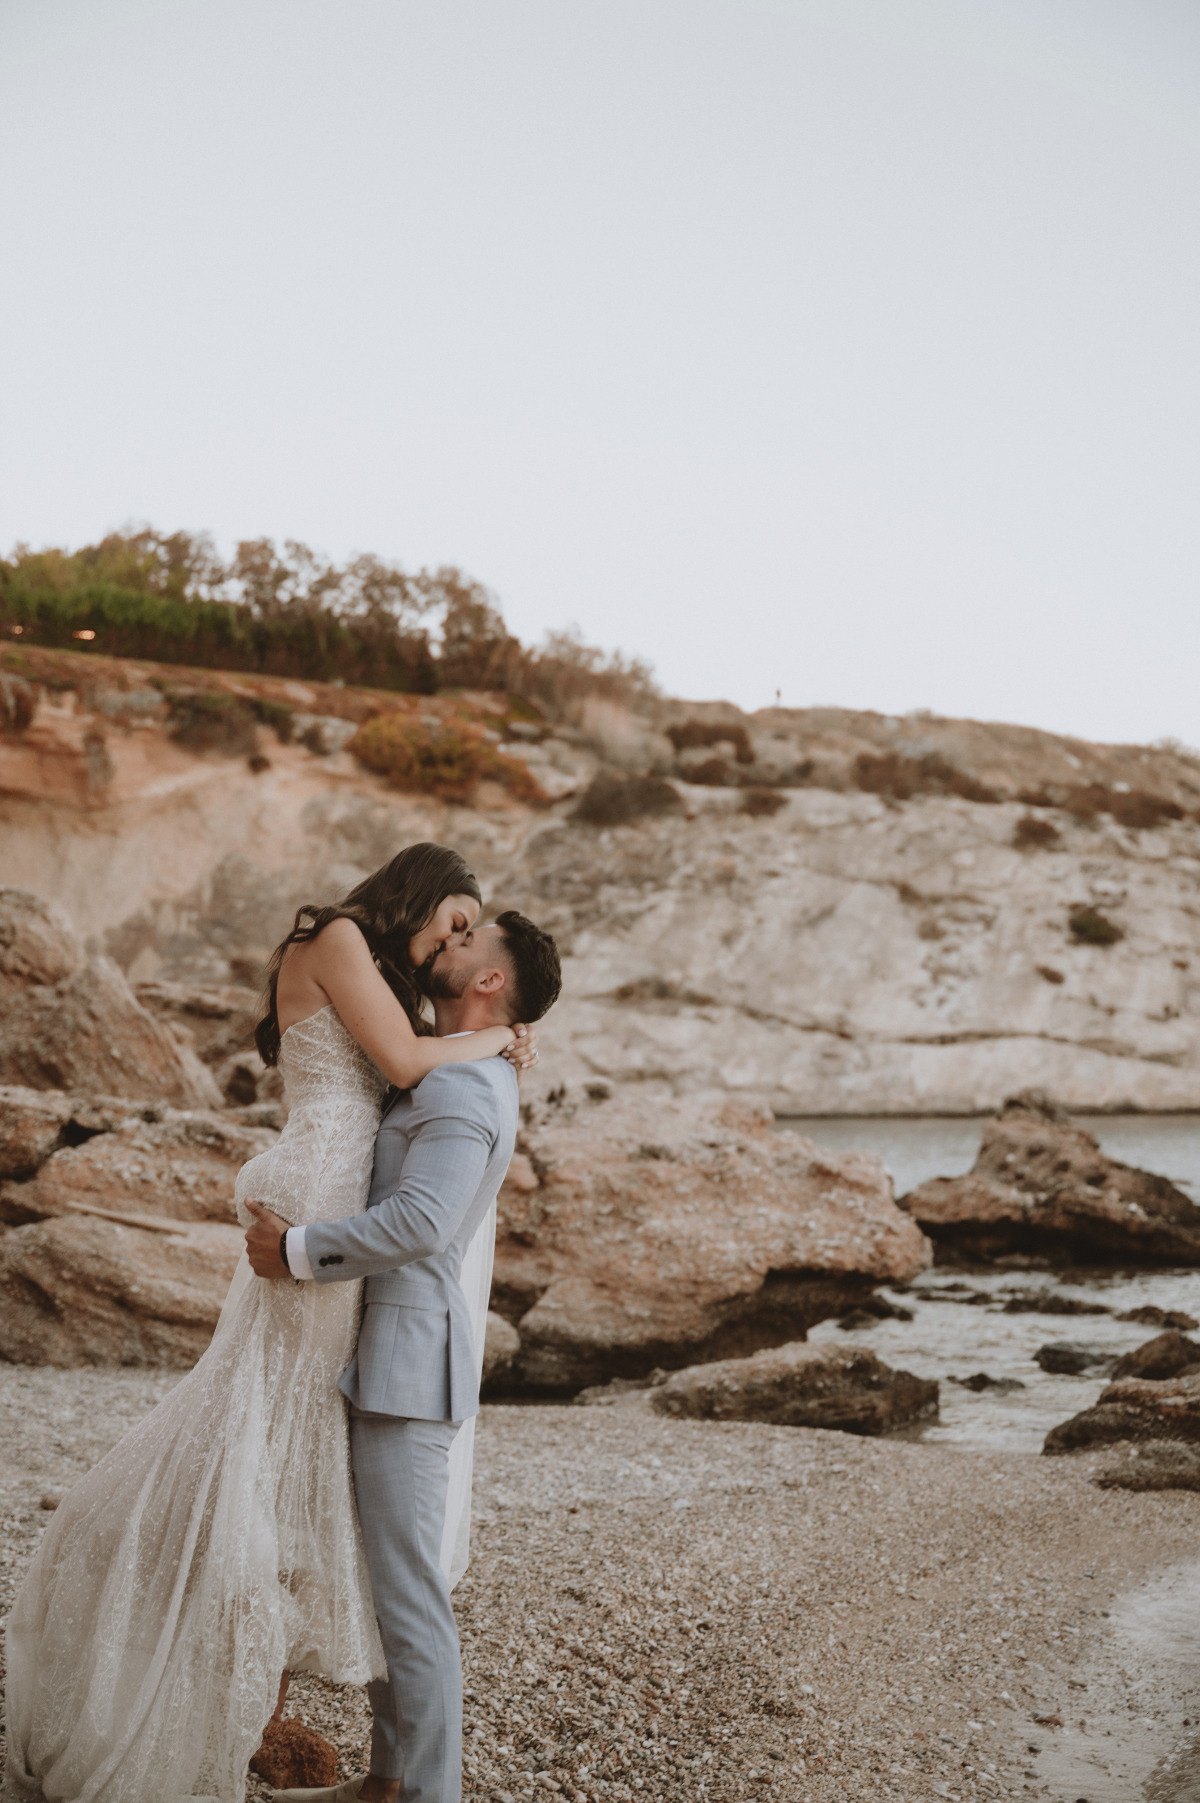 Groom holding up bride and kissing on beach at first look